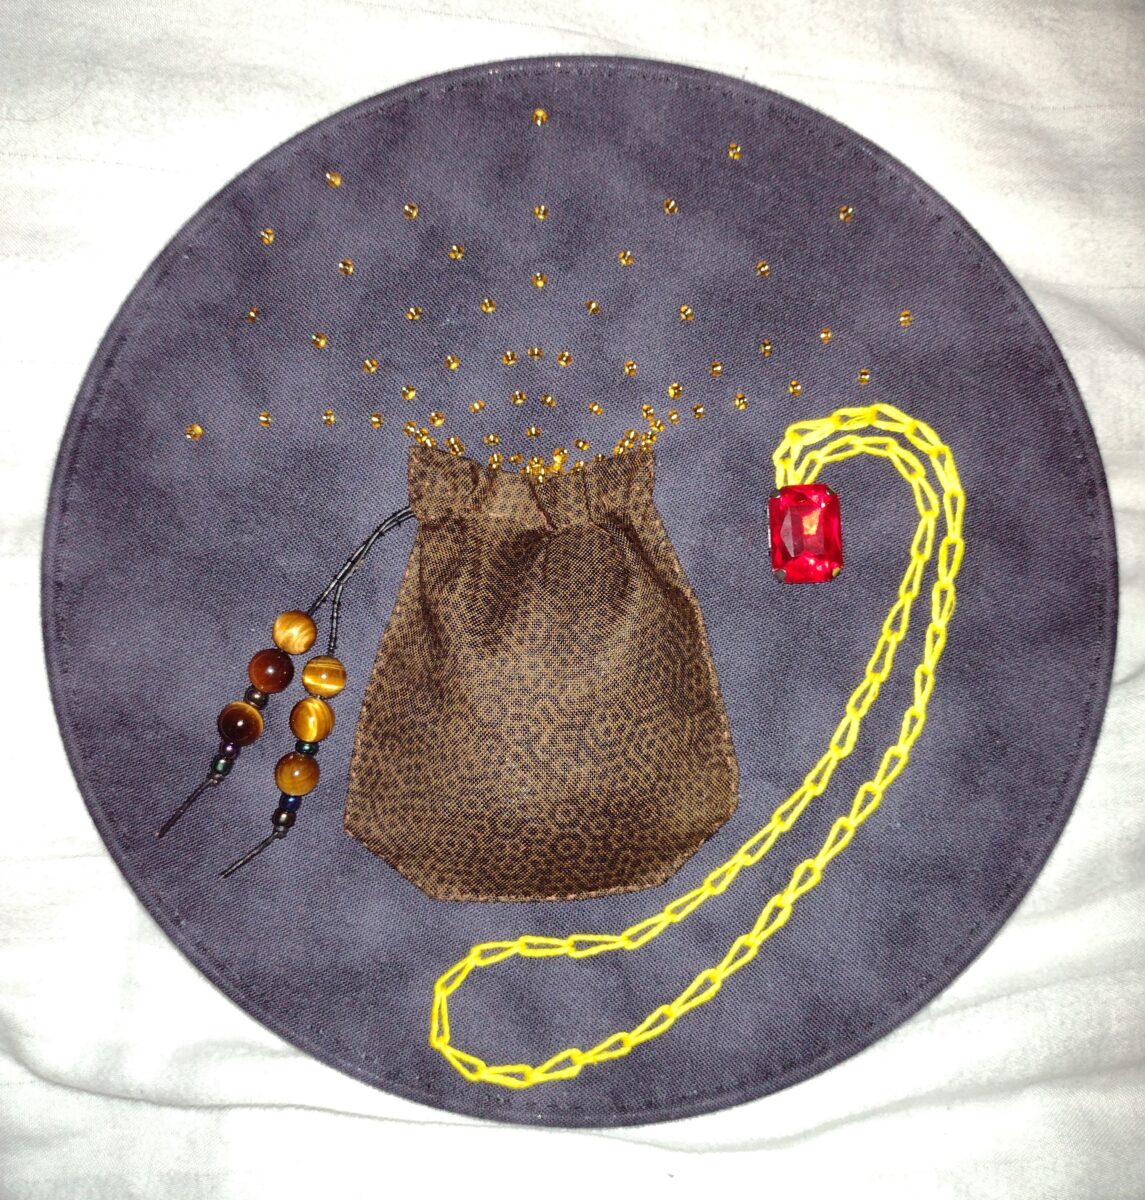 A photograph of a blue-purple fabric circle. In the centre is sown on a brown drawstring pouch with amber beads on the strings. Emanating from the pouch are arches of golden sparks. To the right is sewn on a red jewel with a golden chain.